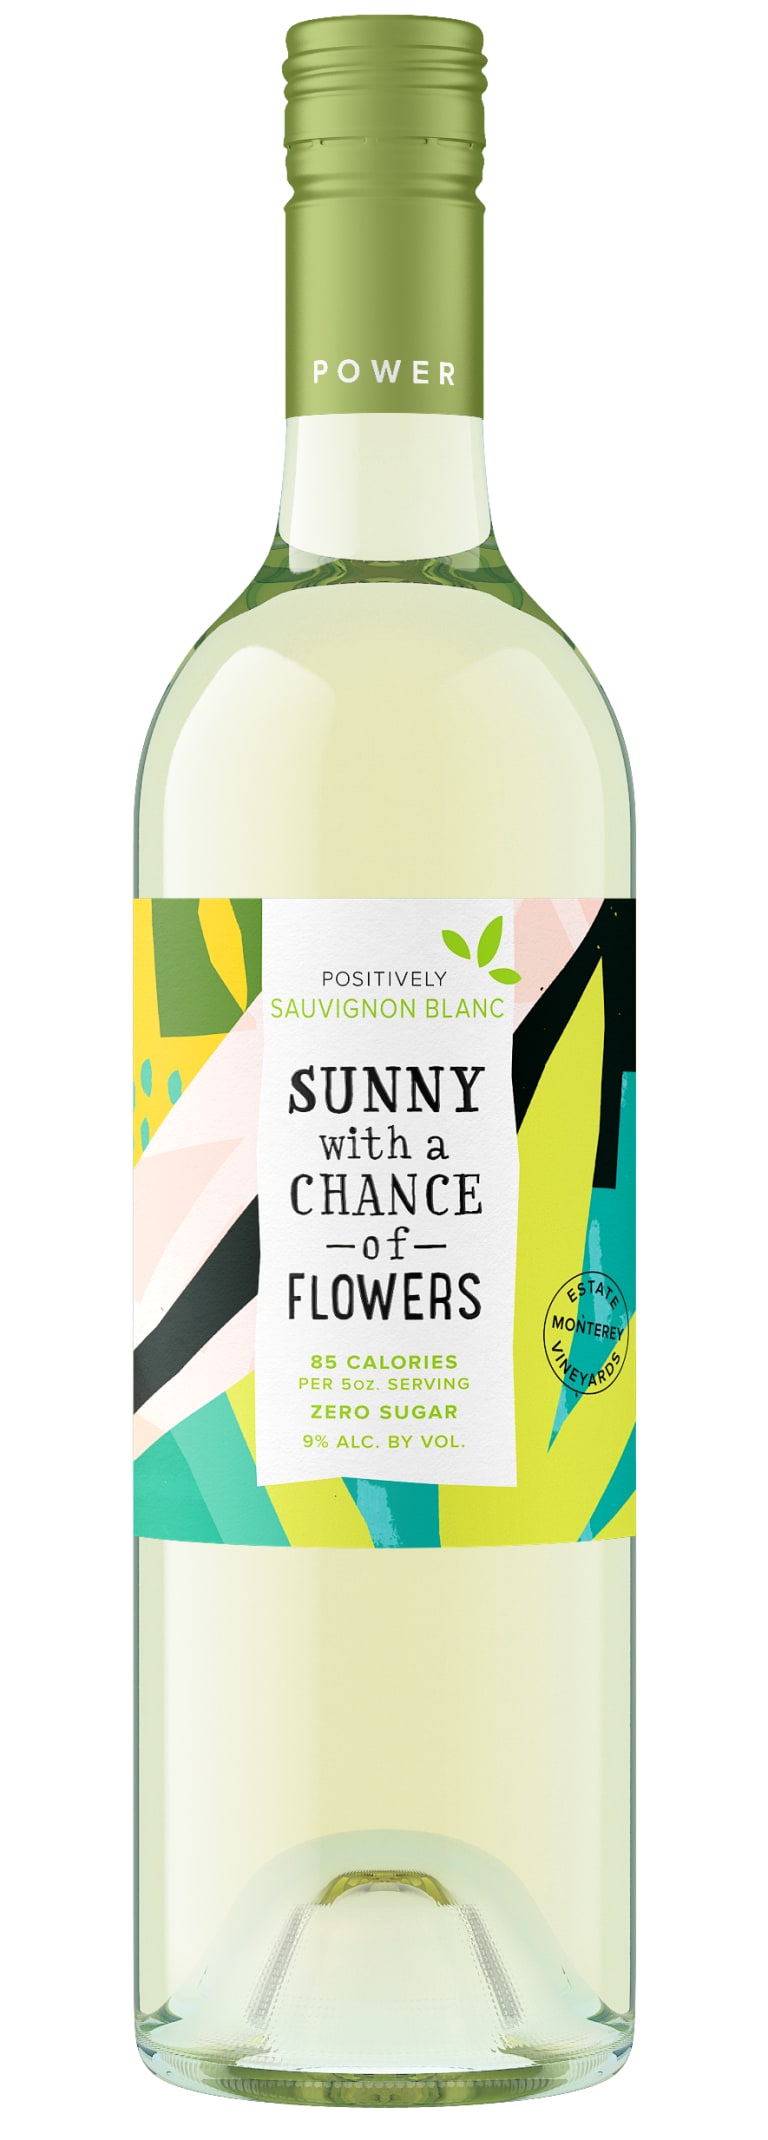 Sunny With A Chance Of Flowers Sauvignon Blanc 2019